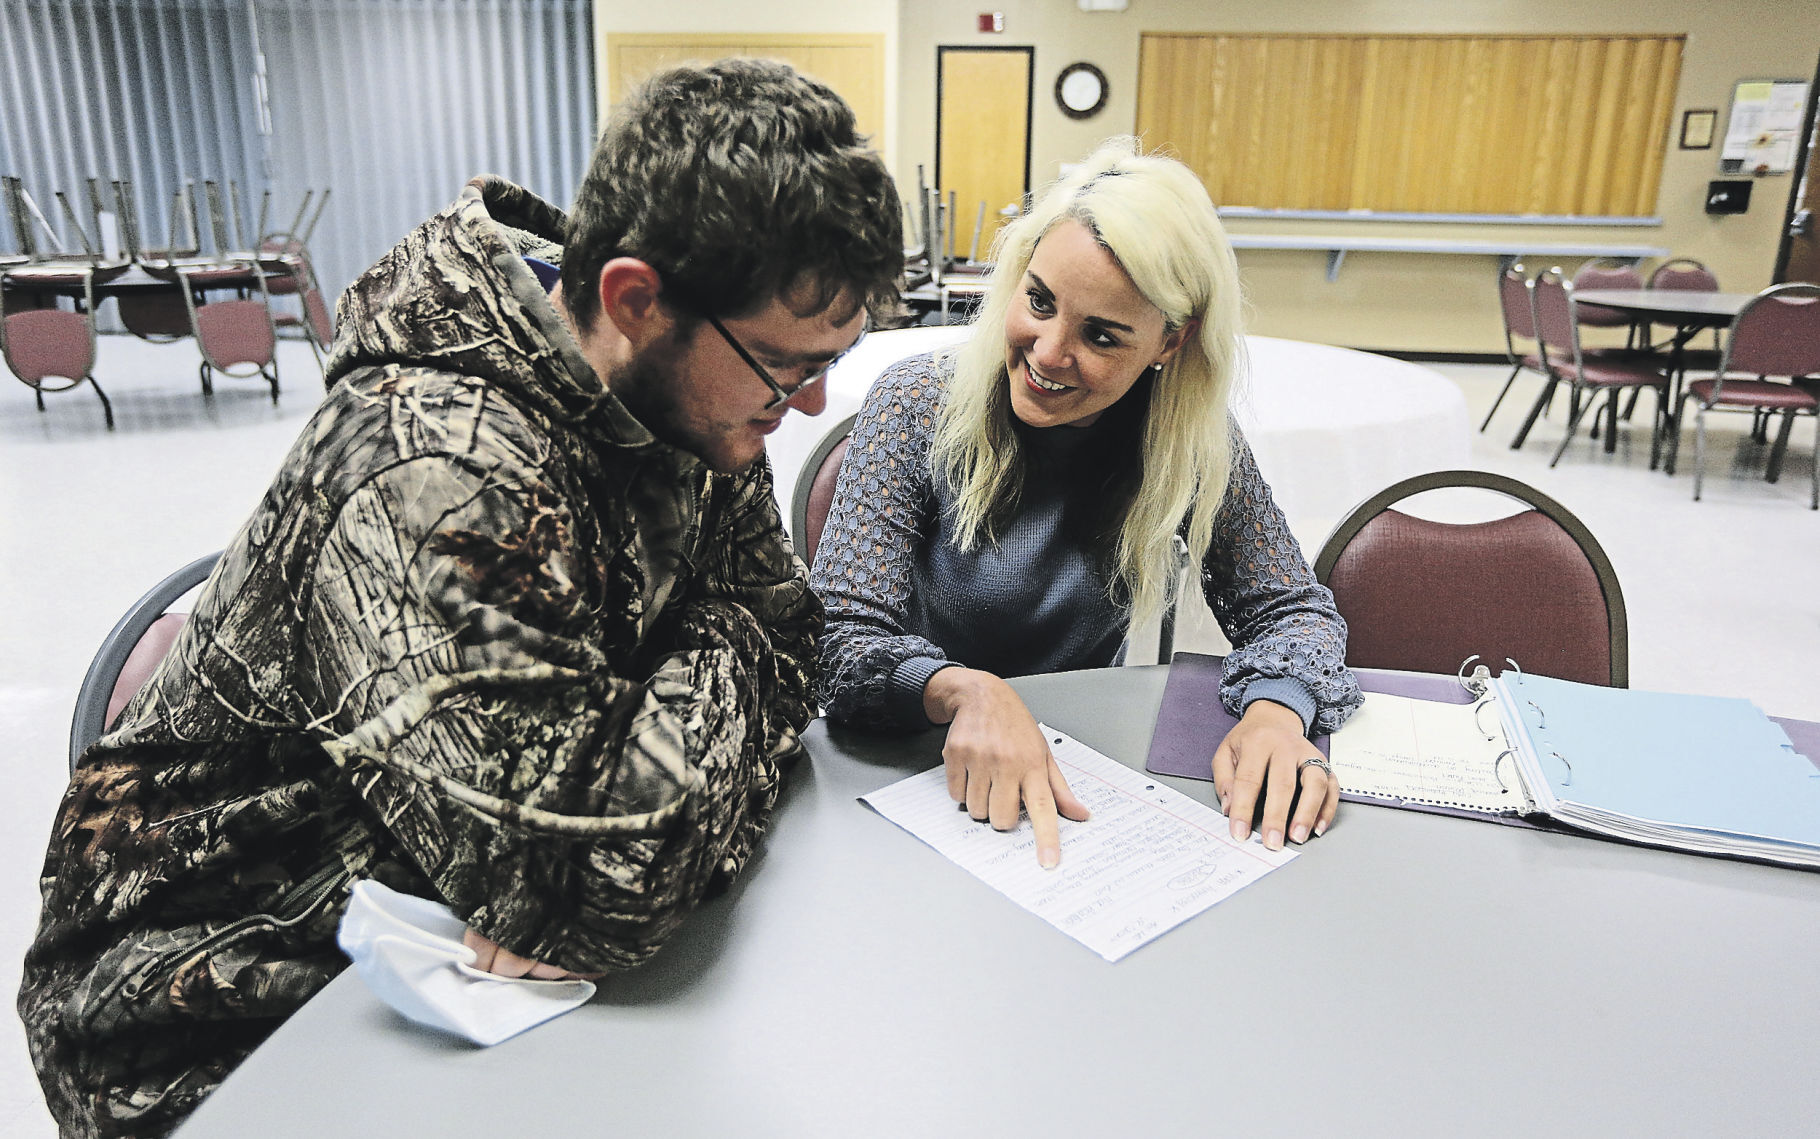 Kara Huss, Community Services Director at Hills & Dales in Dubuque, works with client, Cody Robinson, at the Hills & Dales Community Center.    PHOTO CREDIT: Dave Kettering